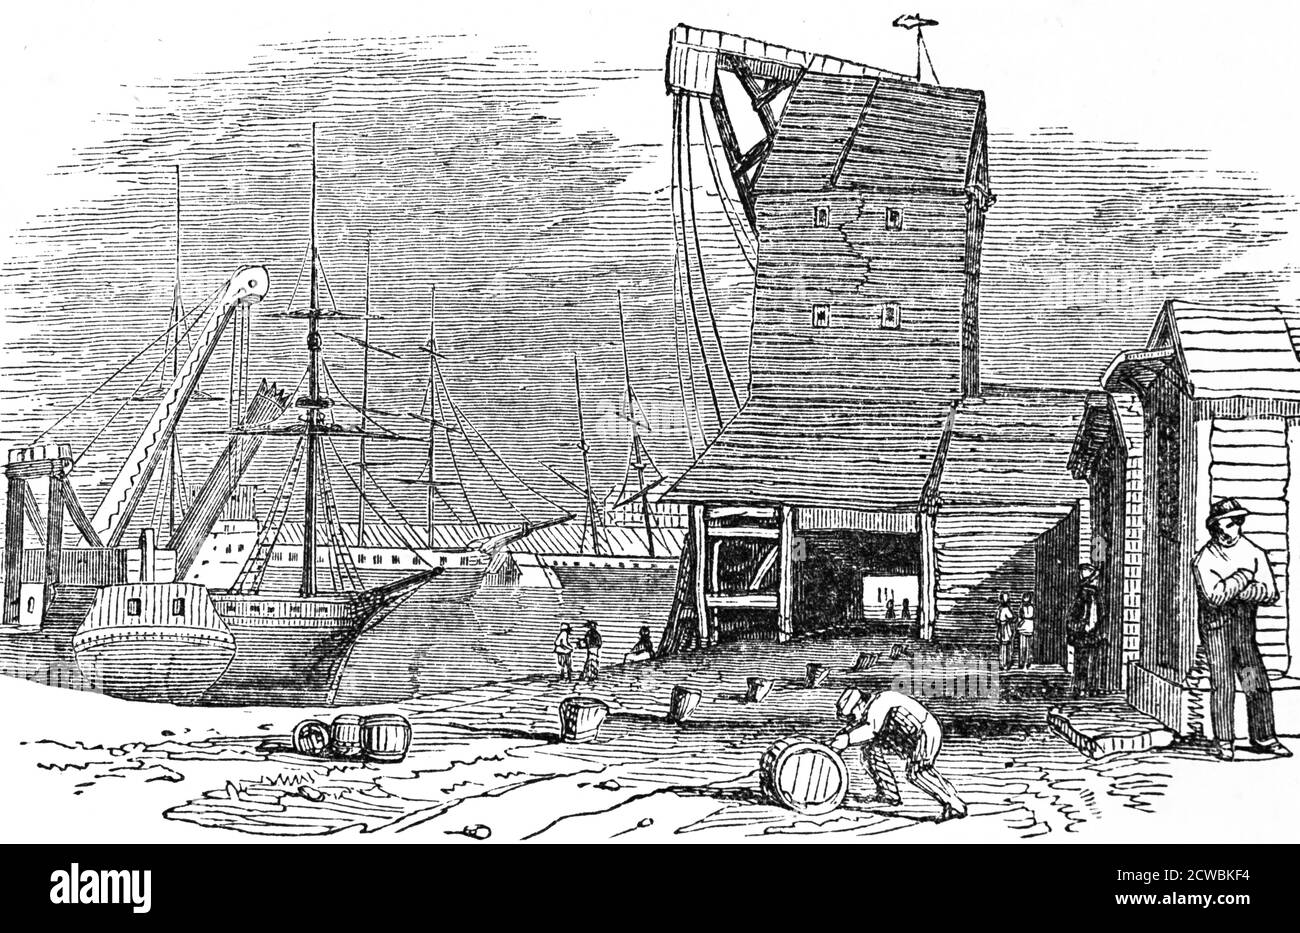 Engraving depicting the Masting House on the East India Export Dock, London. Stock Photo